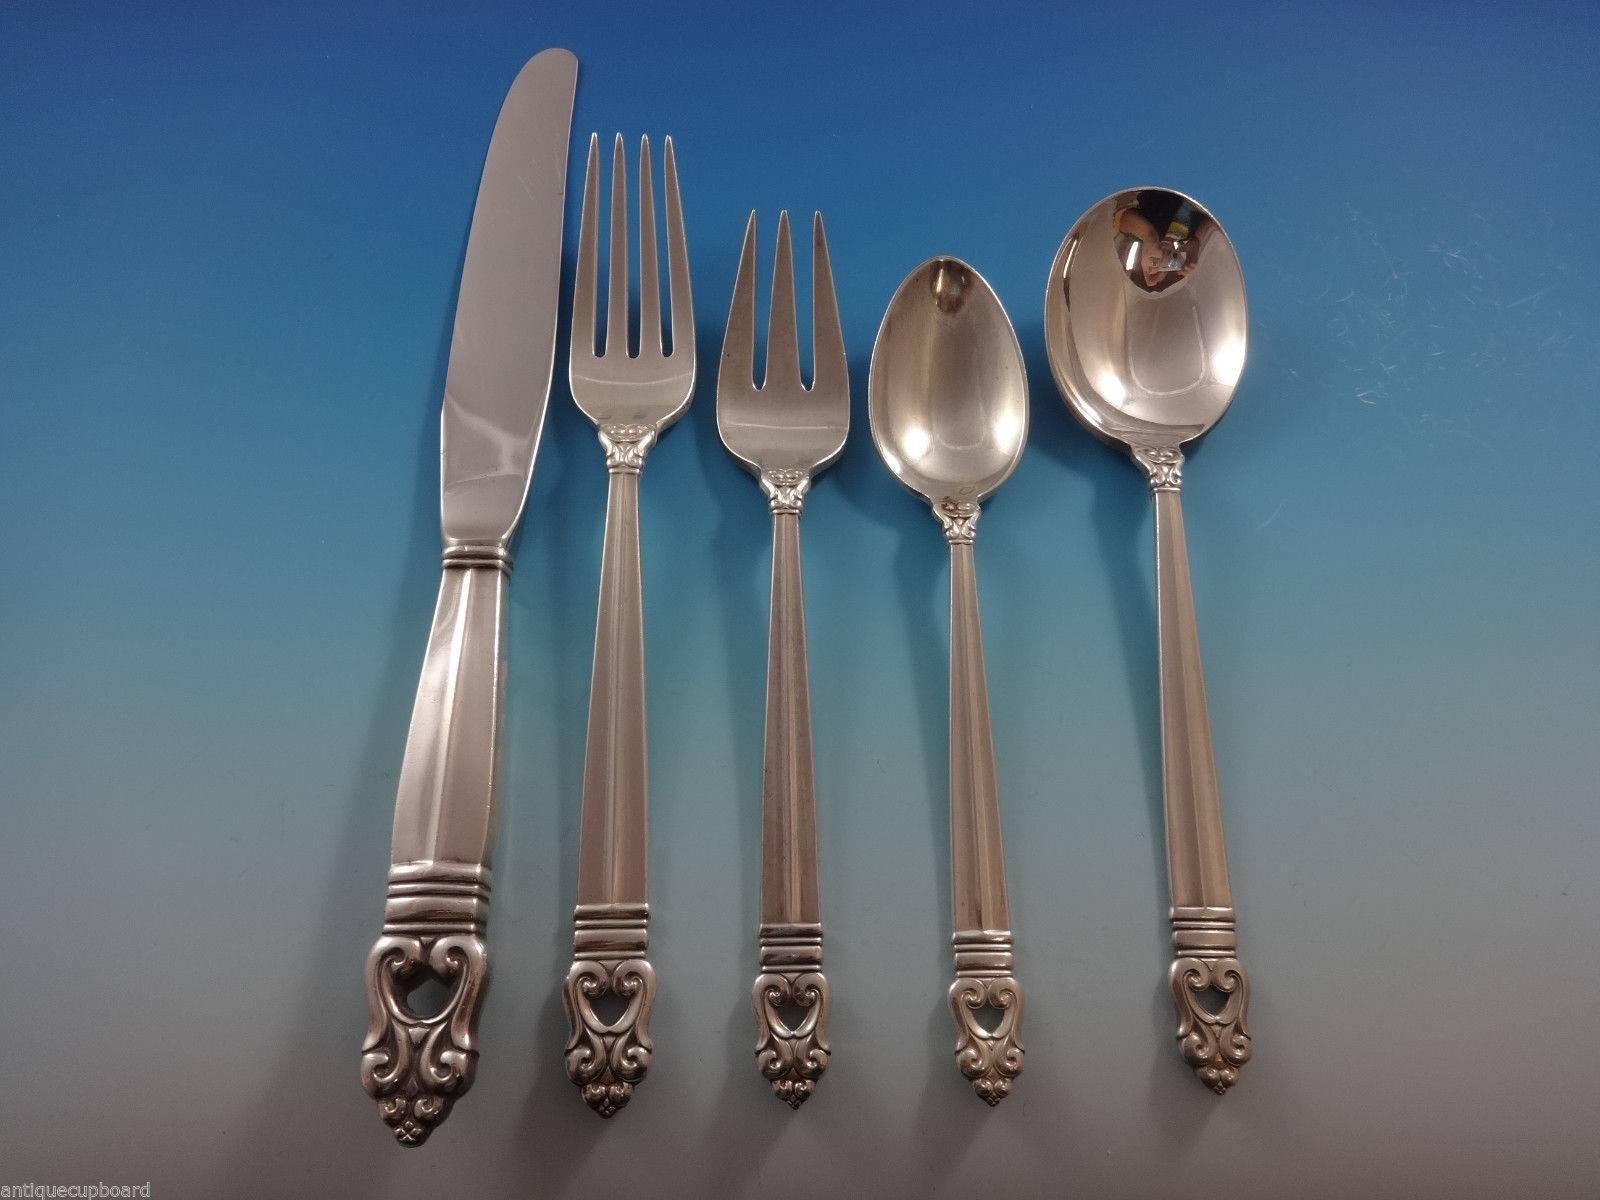 The accent is on form and symmetry in Royal Danish, which takes its influence from the traditional artistry of Scandinavia. Bold openwork reflects this modern interpretation, even on the knife handles. Cut with the clarity of a fine jewel, these